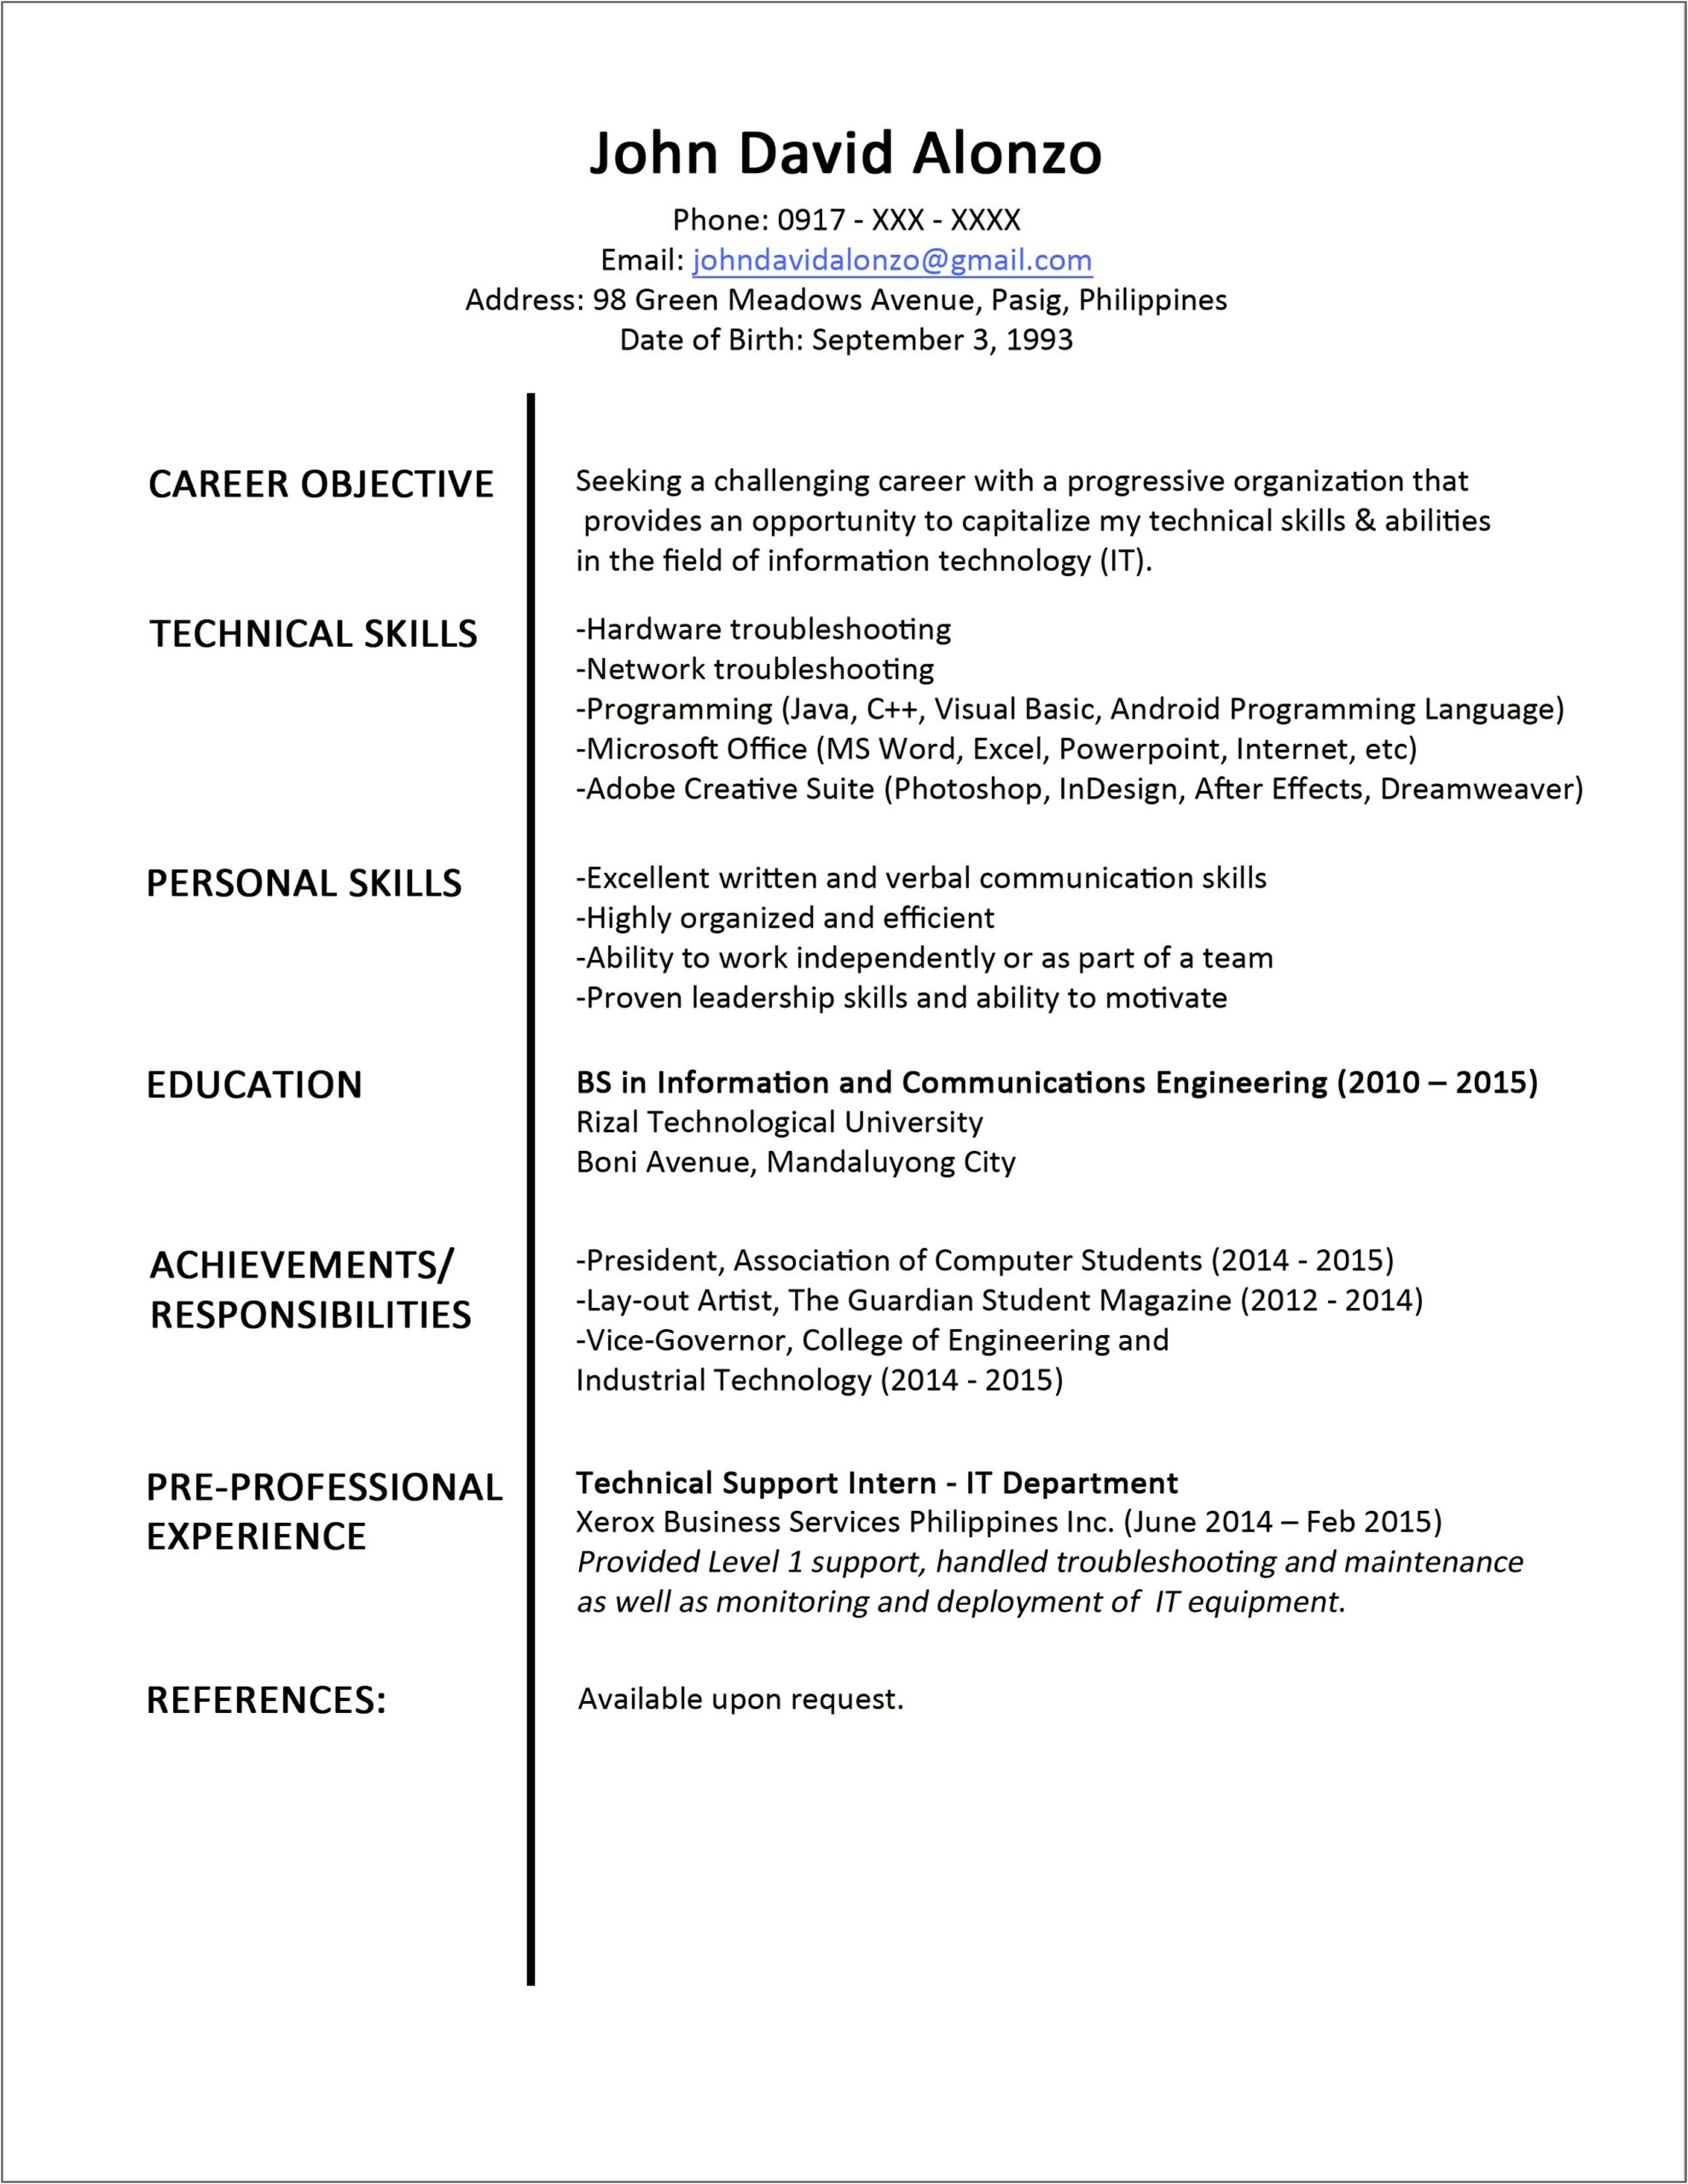 Career Objective In Resume For Networking